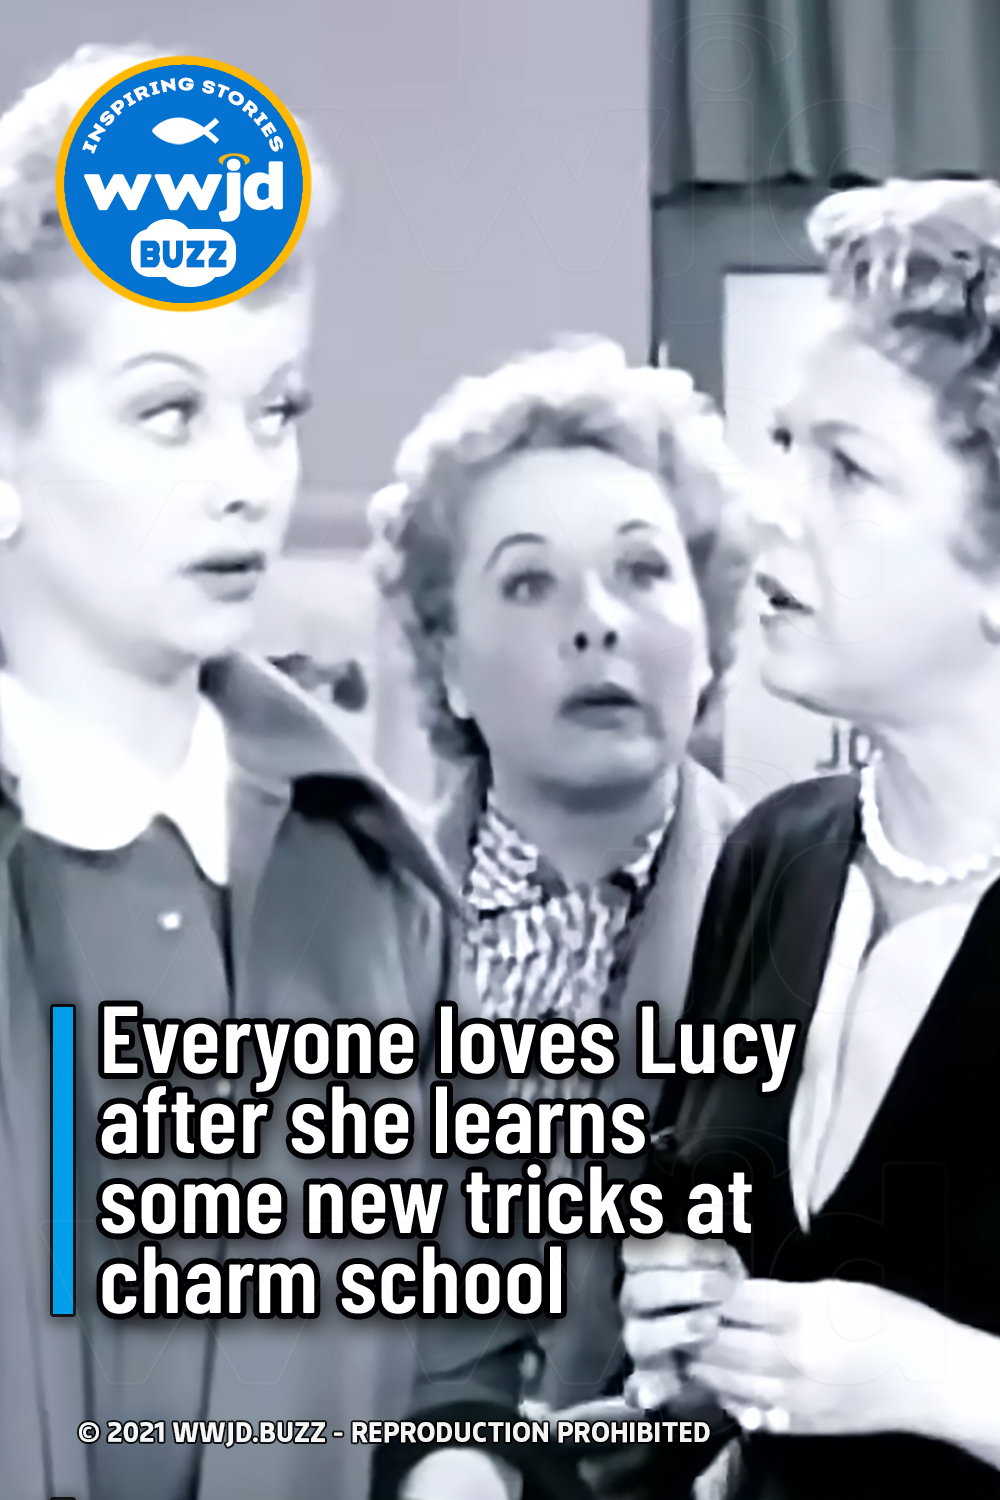 Everyone loves Lucy after she learns some new tricks at charm school